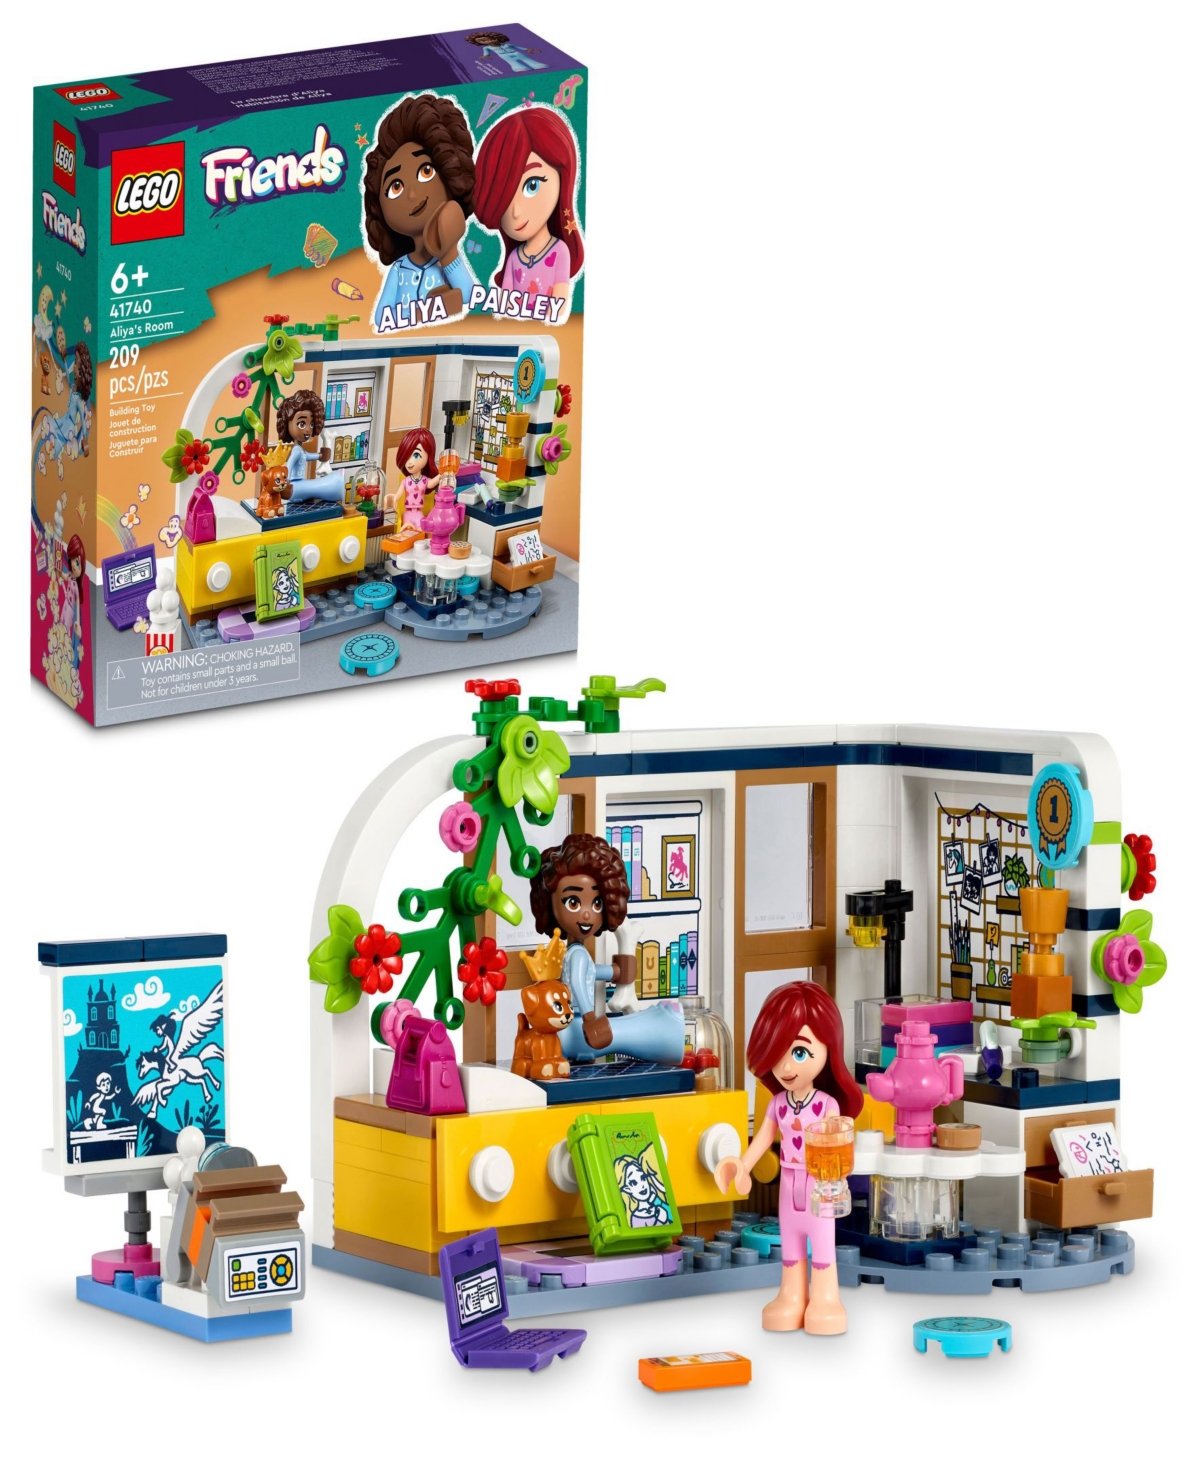 Lego Friends Aliya's Room 41740 Toy Building Set With Aliya, Paisley And Dog Figures In Multicolor